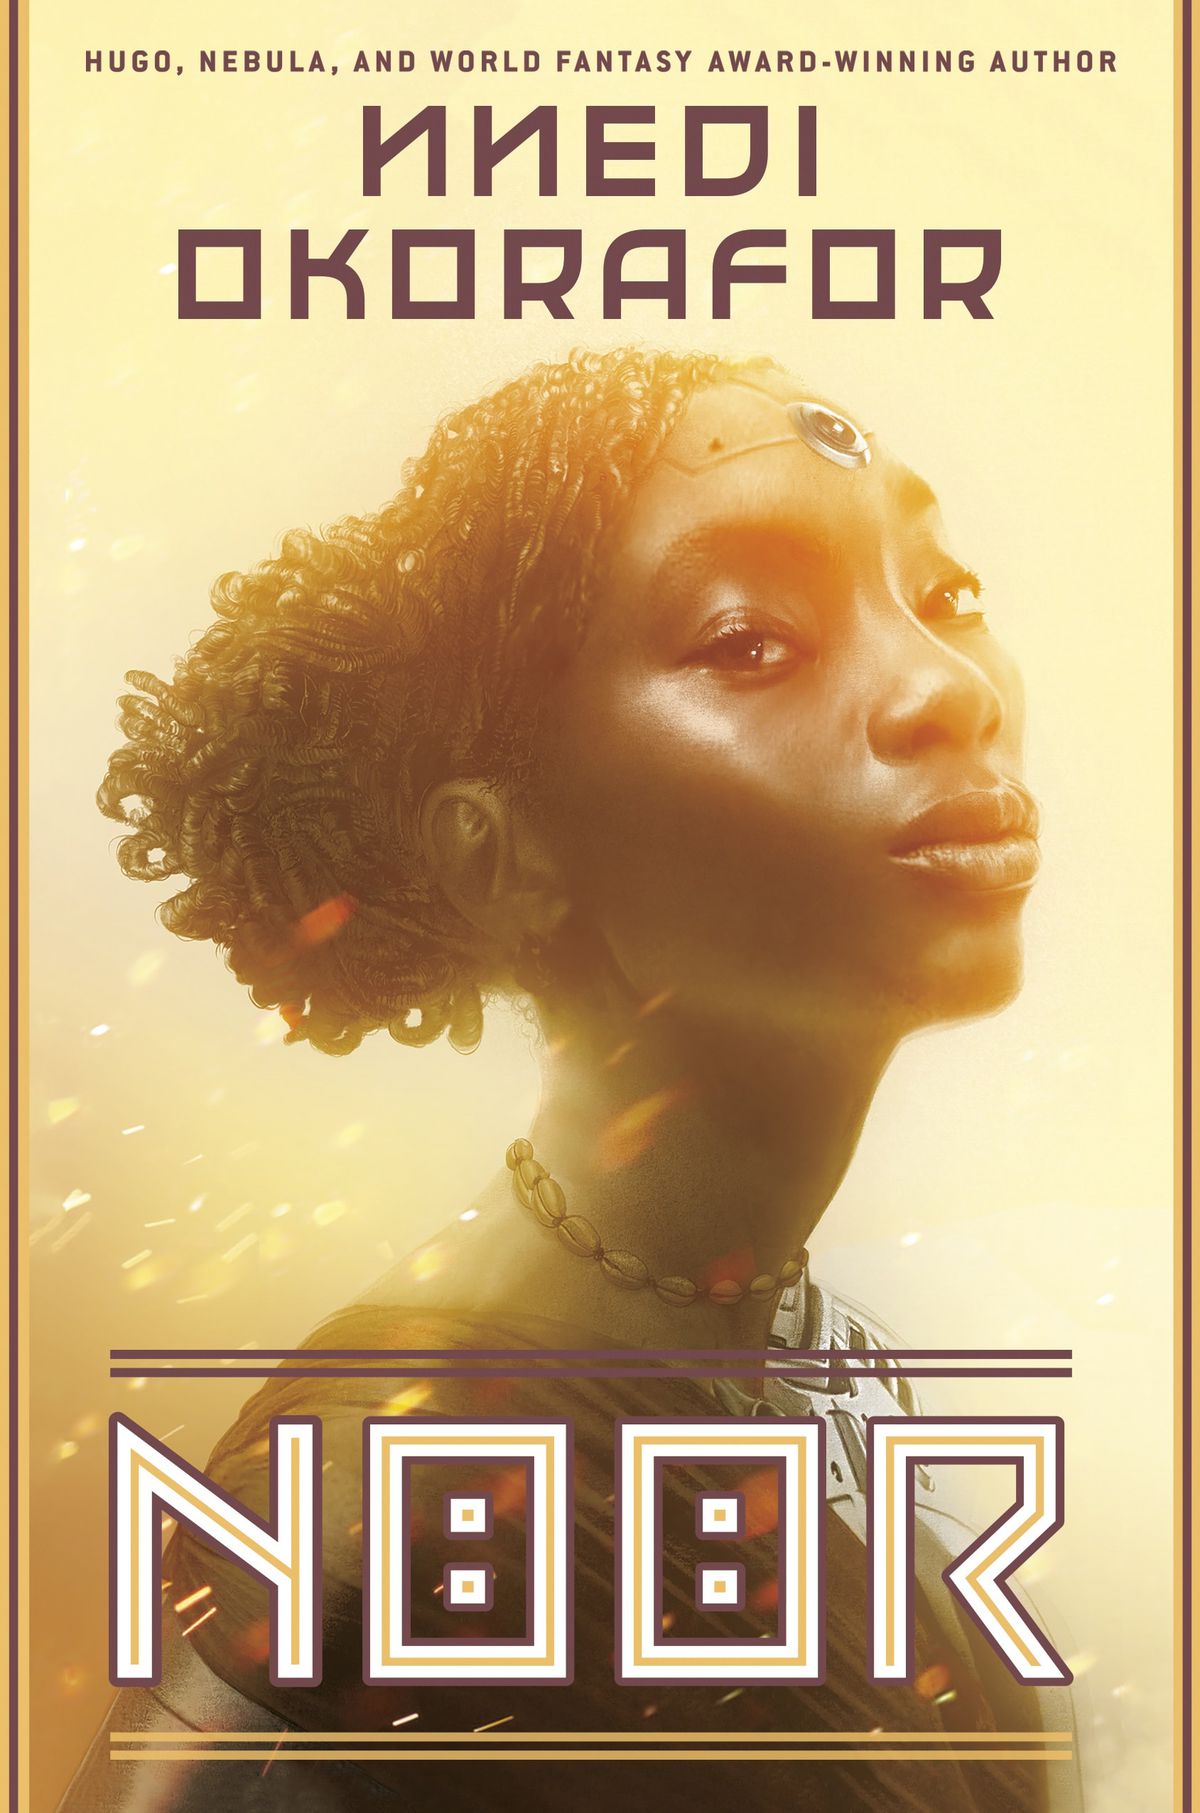 Noor by Nnedi Okorafor book cover featuring a young black woman in ornate jewelry